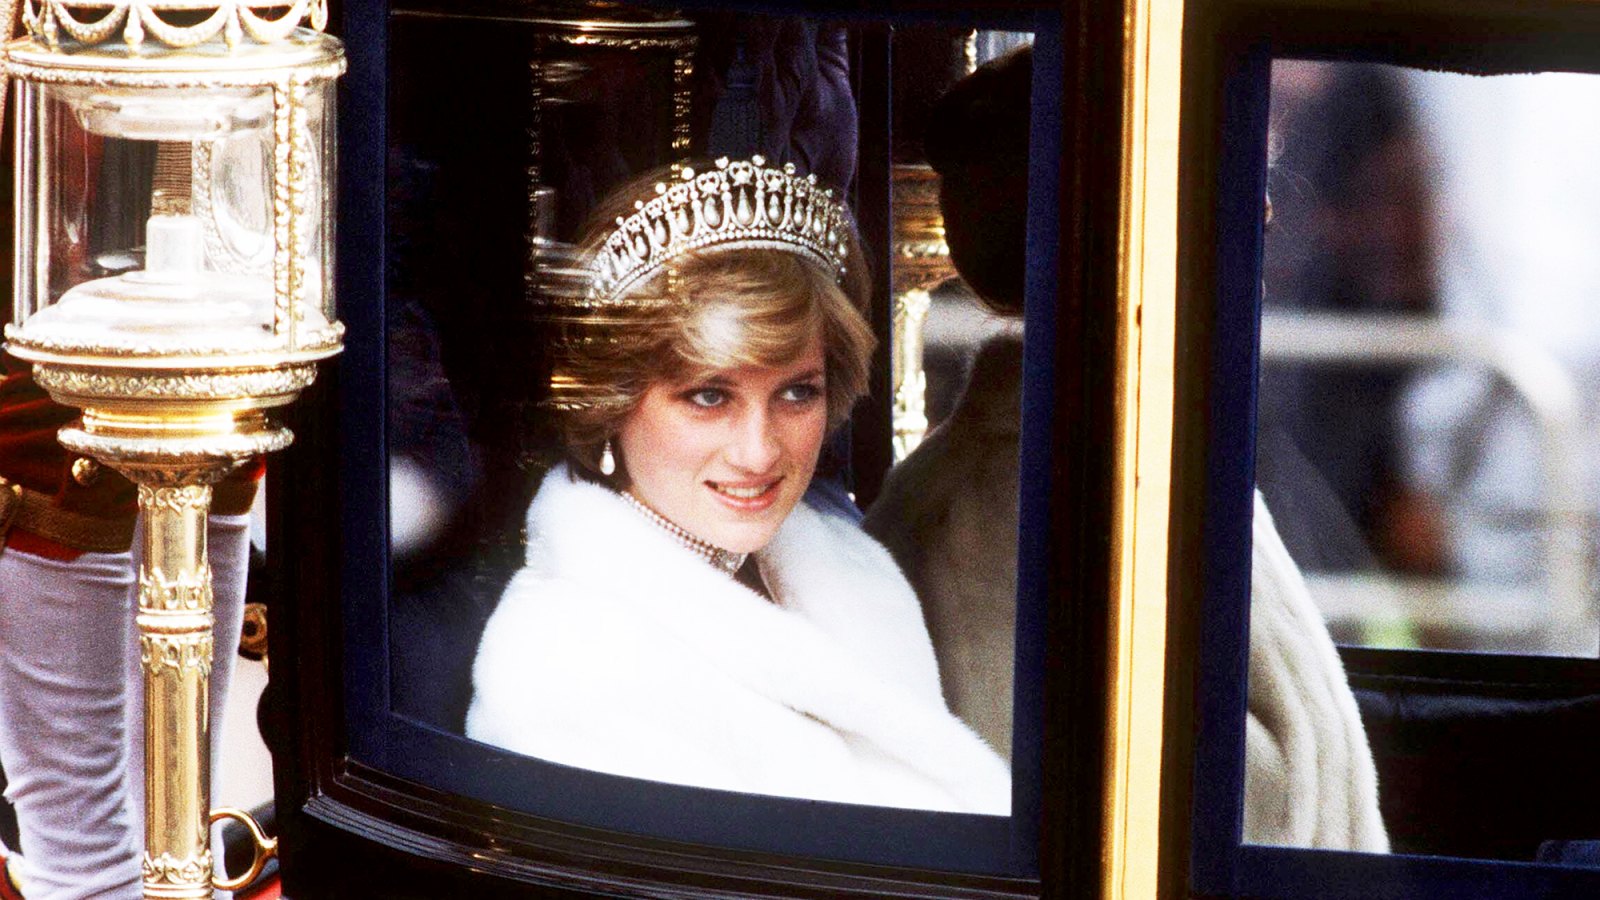 Princess Diana on her way to the State Opening of Parliament in November 1981 in London, England.